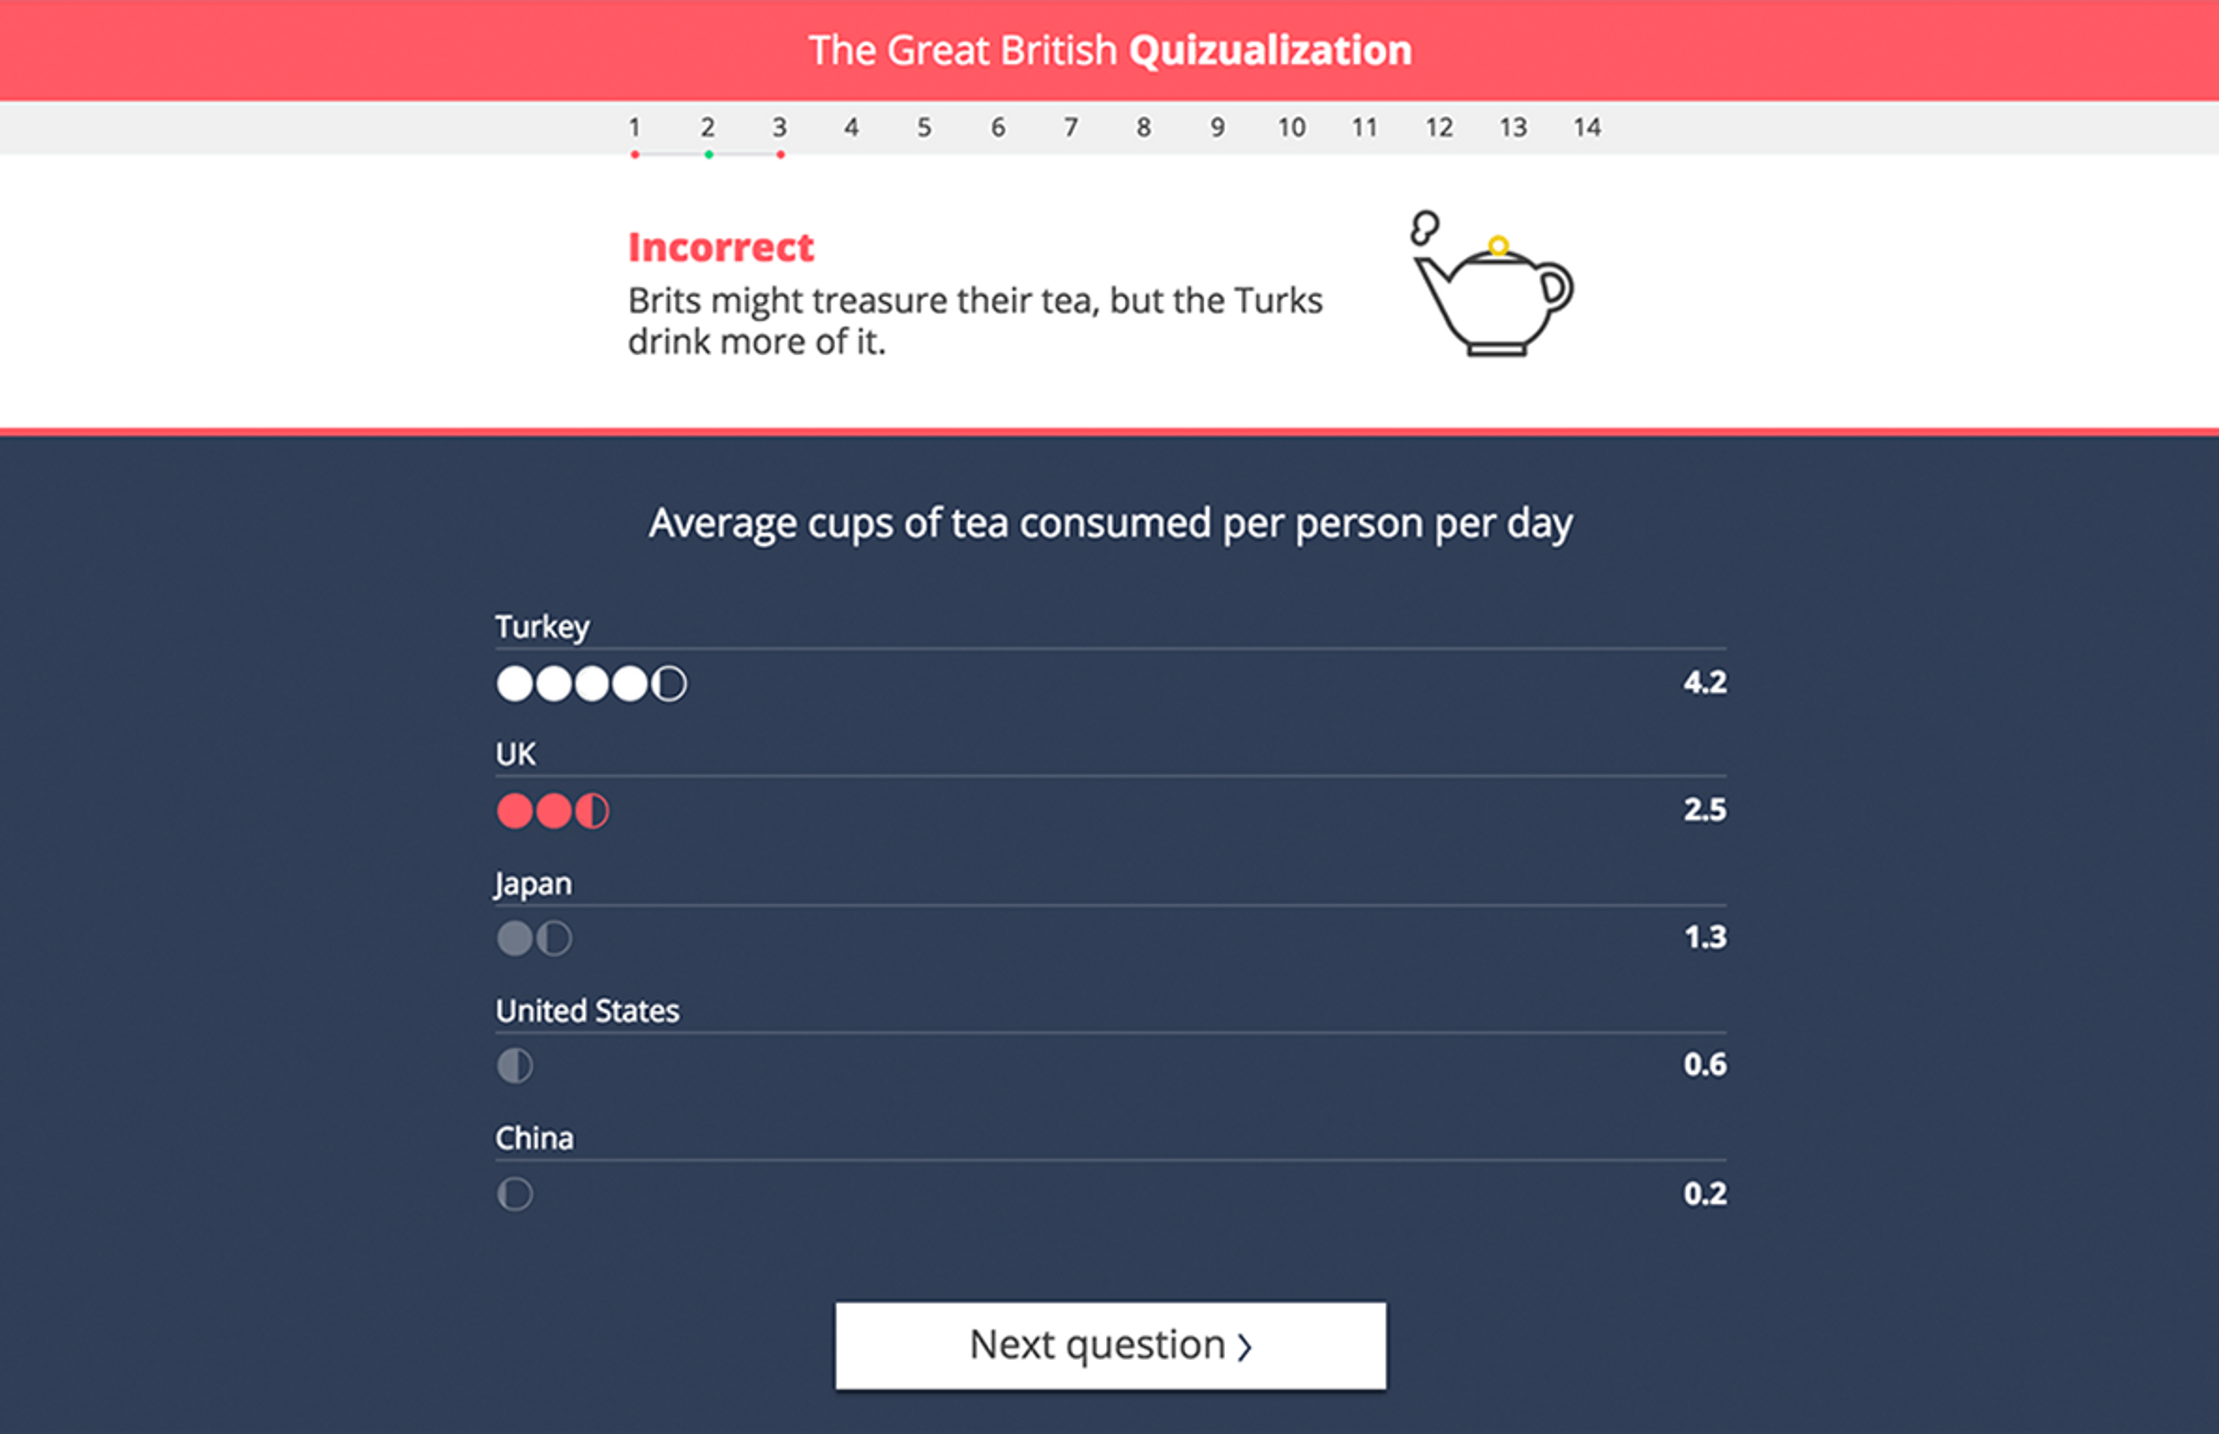 A screenshot from an answer in the Great British Quizualization. It shows average cups of team consumed per person per day. Turkey is the highest at 4.2 with the British second on 2.5 cups per day.